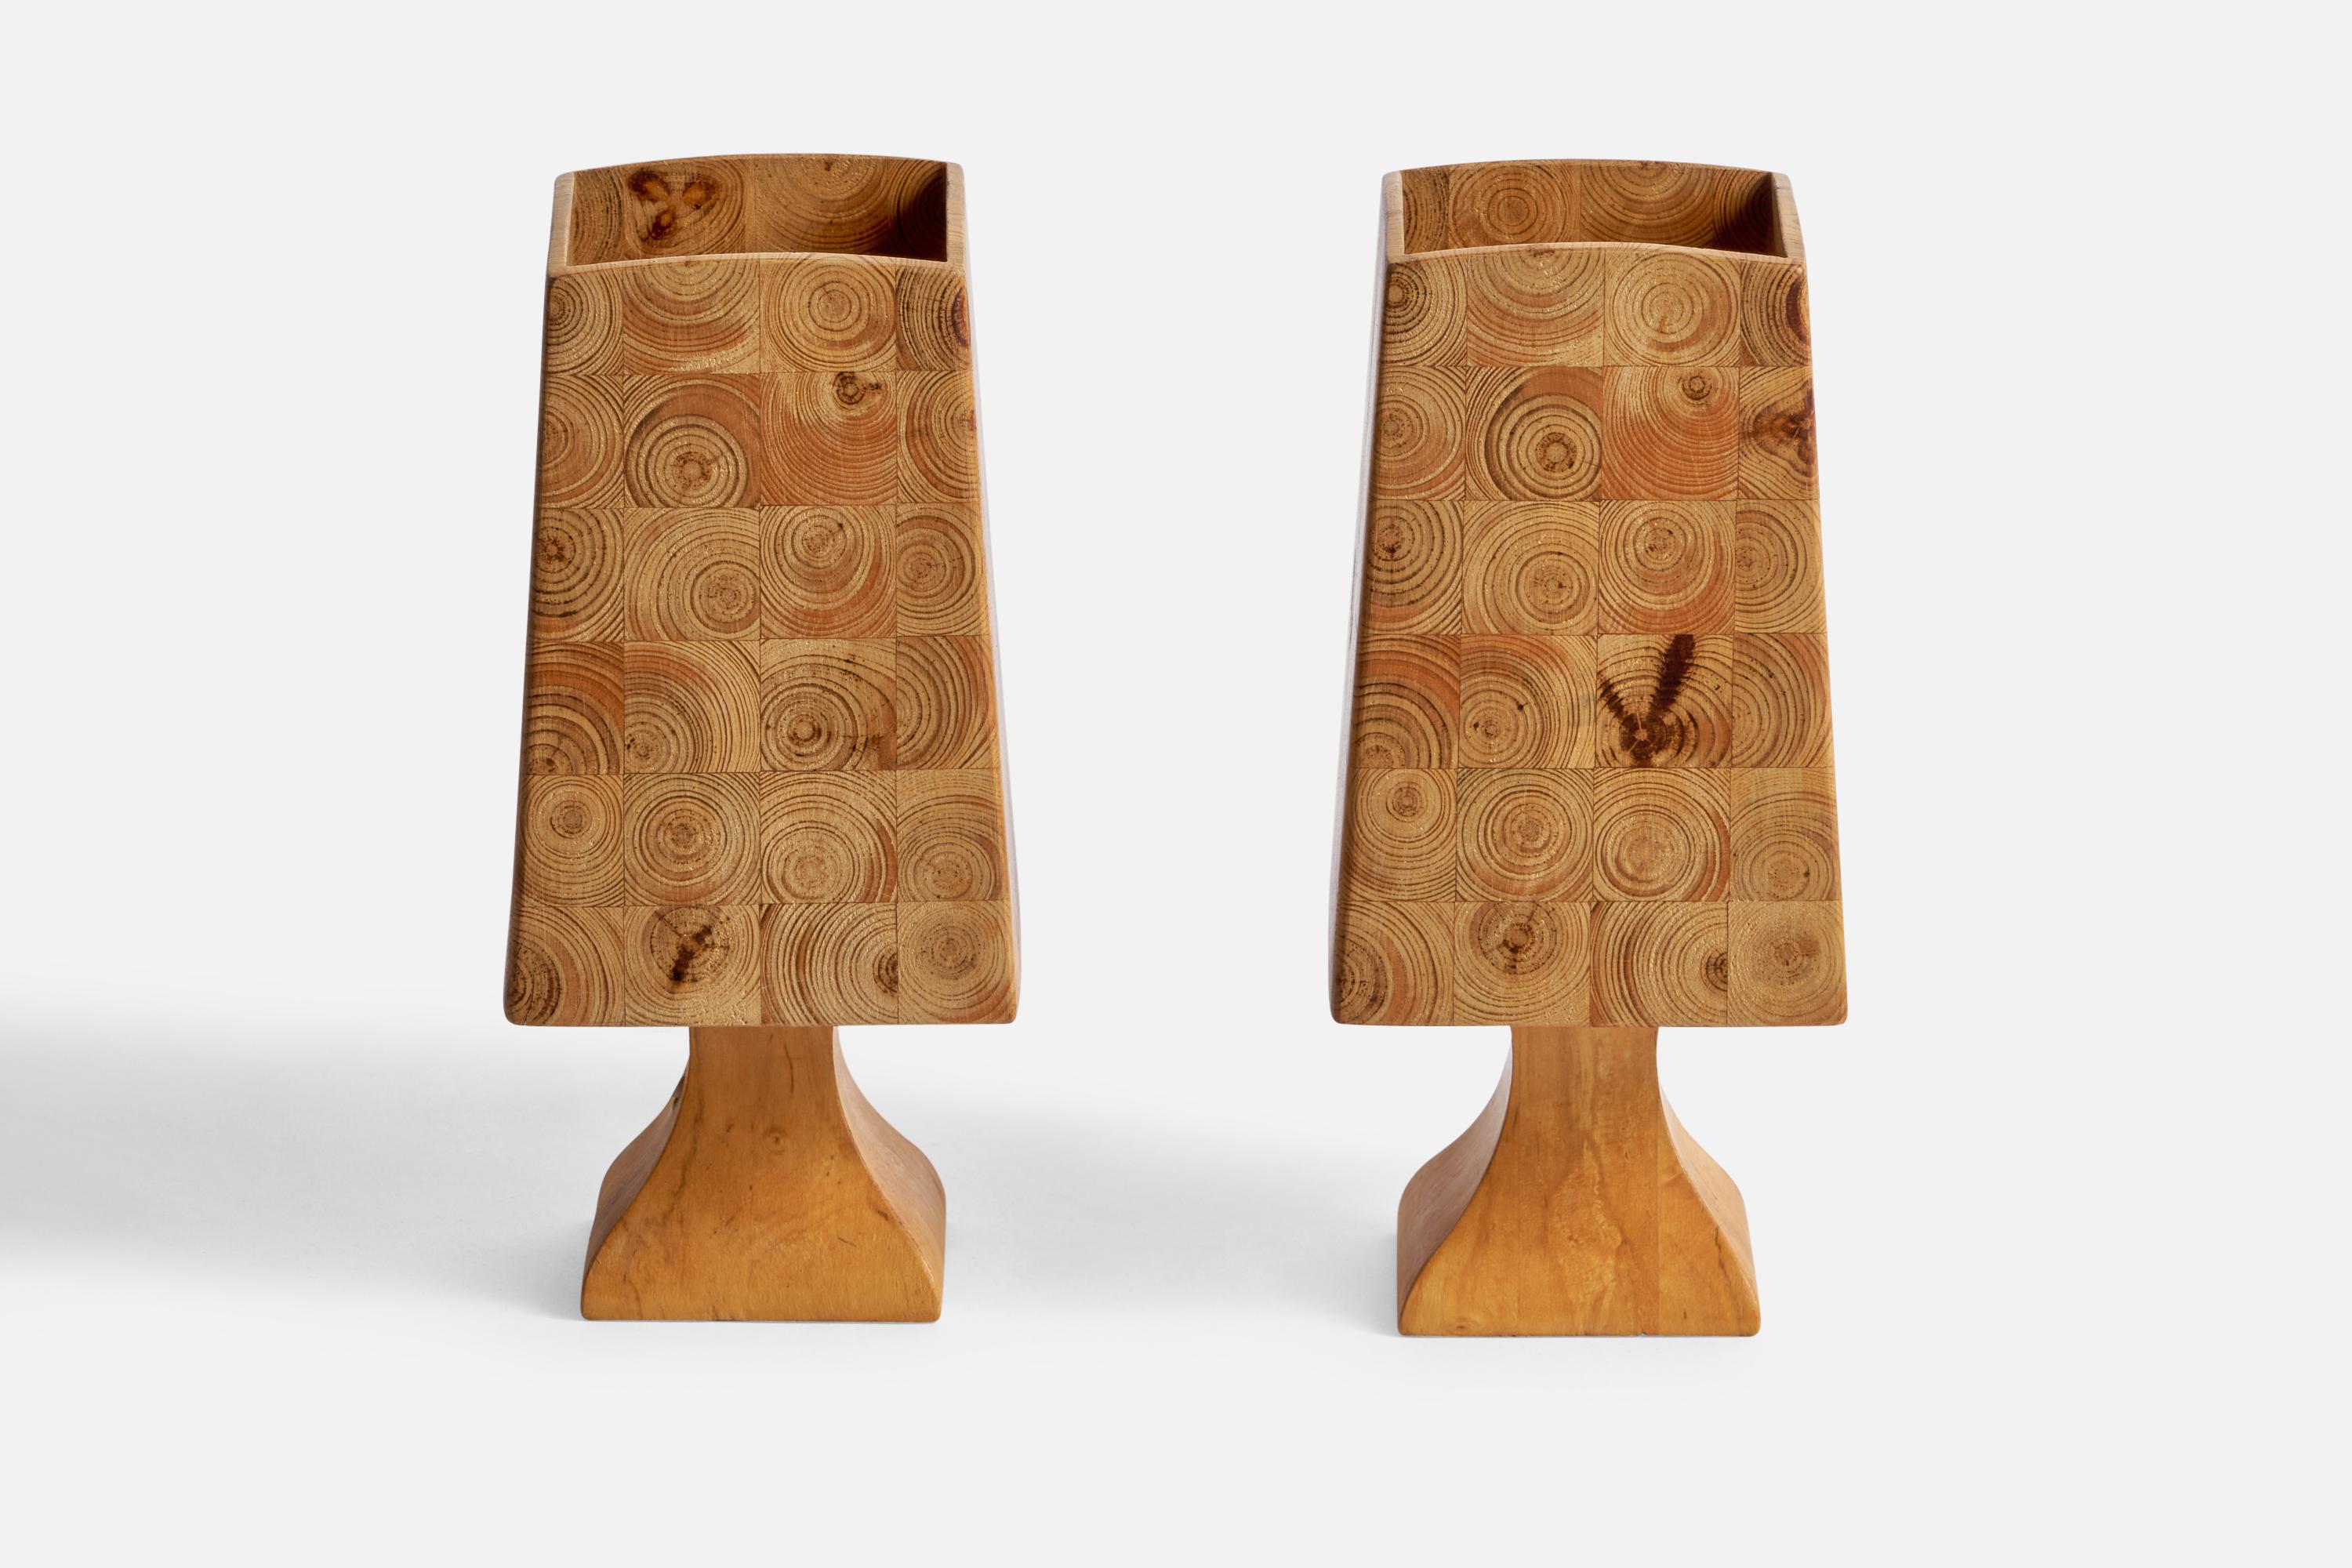 A pair of pine table lamps designed and produced in Sweden, 1970s.

Overall Dimensions (inches): 7.35” H x 3.3” W x 3.3” D
Bulb Specifications: E-14 Bulb
Number of Sockets: 2
All lighting will be converted for US usage. We are unable to confirm that